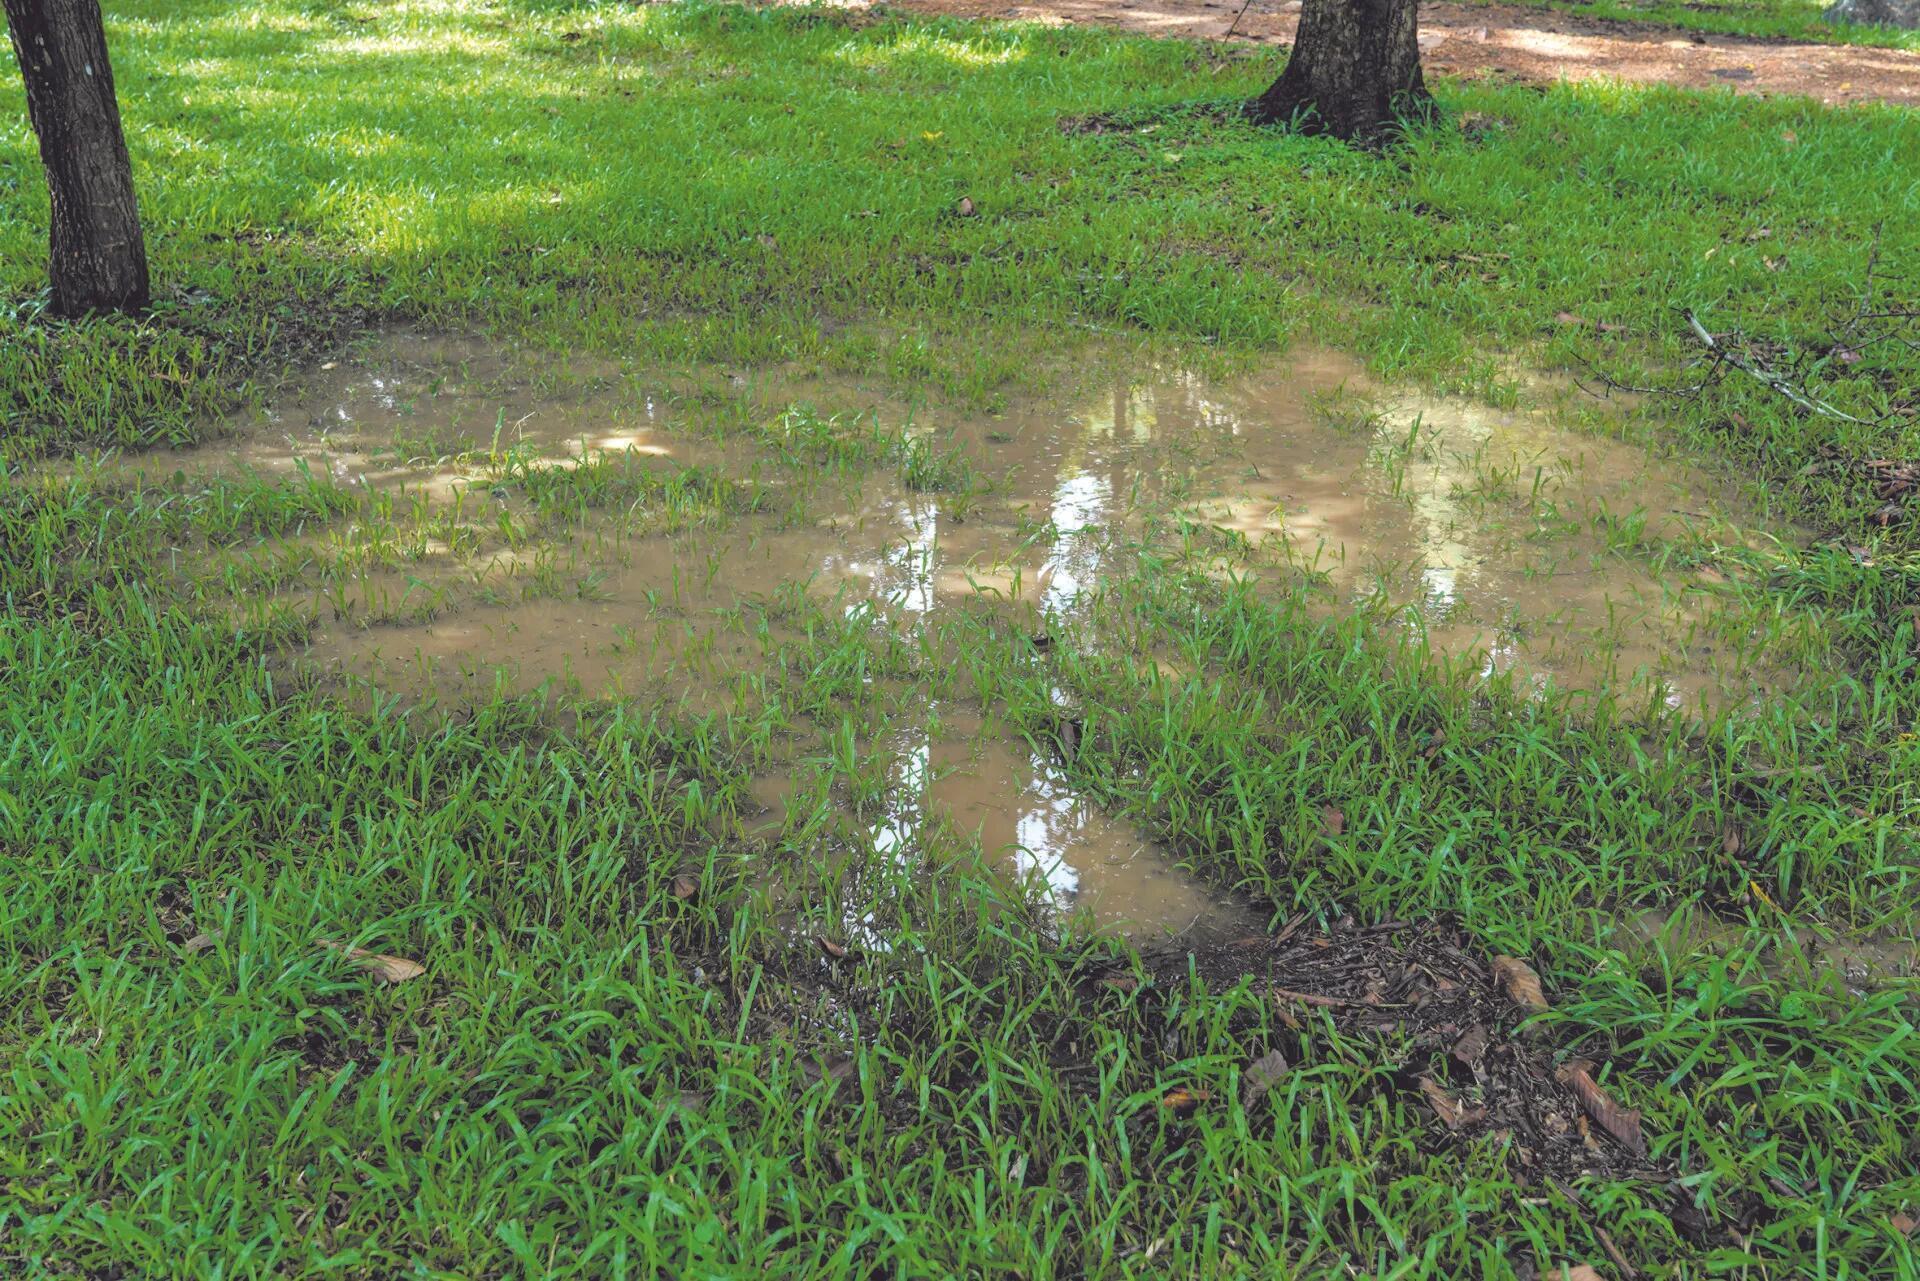 Grass yard flooded with water